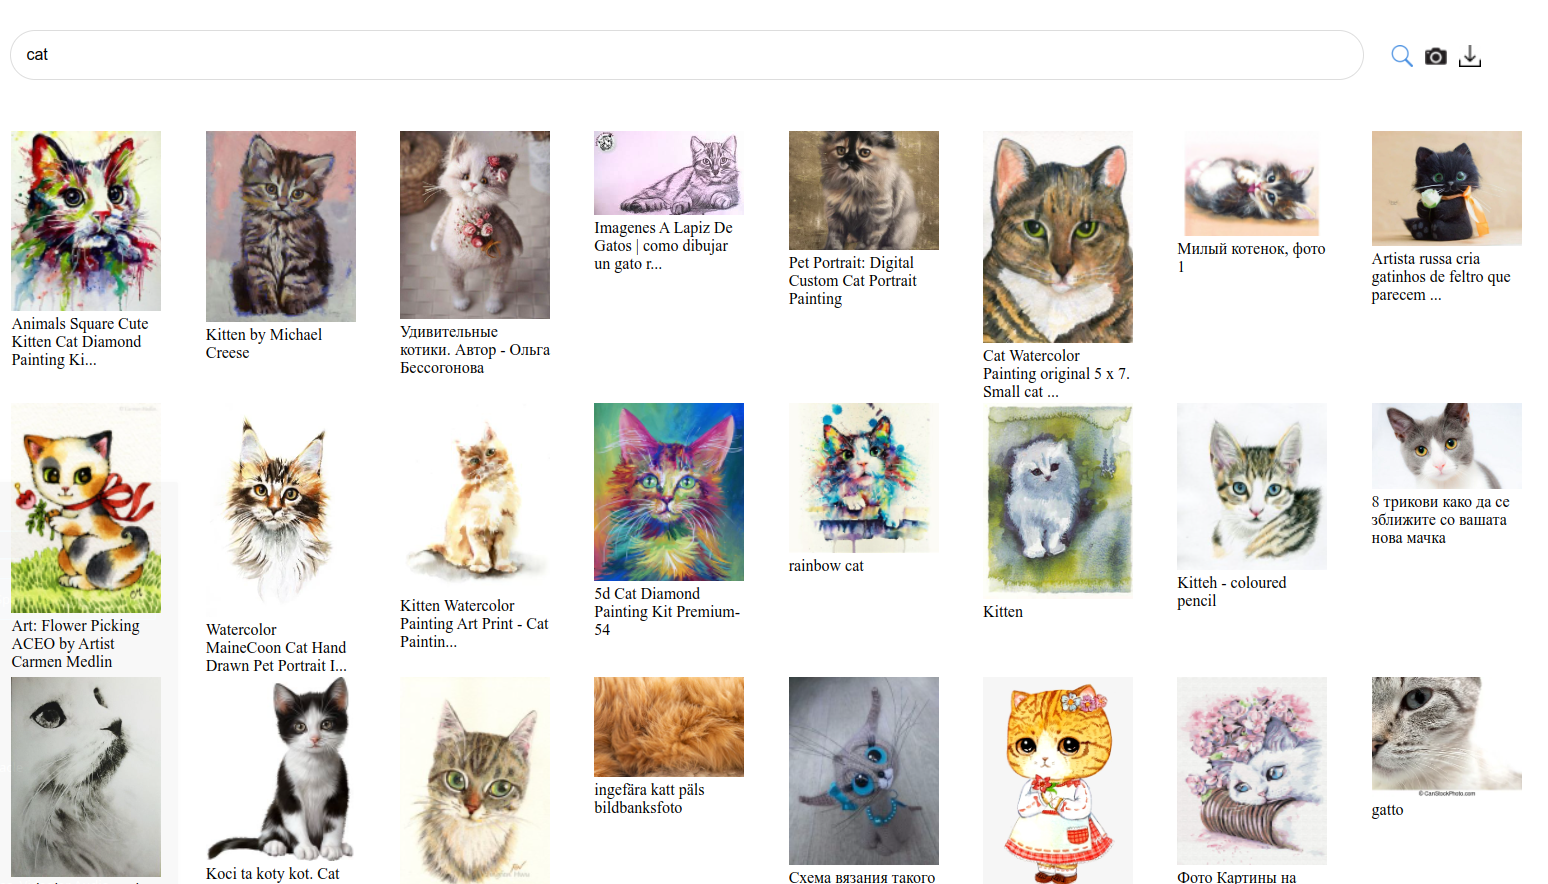 shows the search for cats in laion-aesthetic dataset